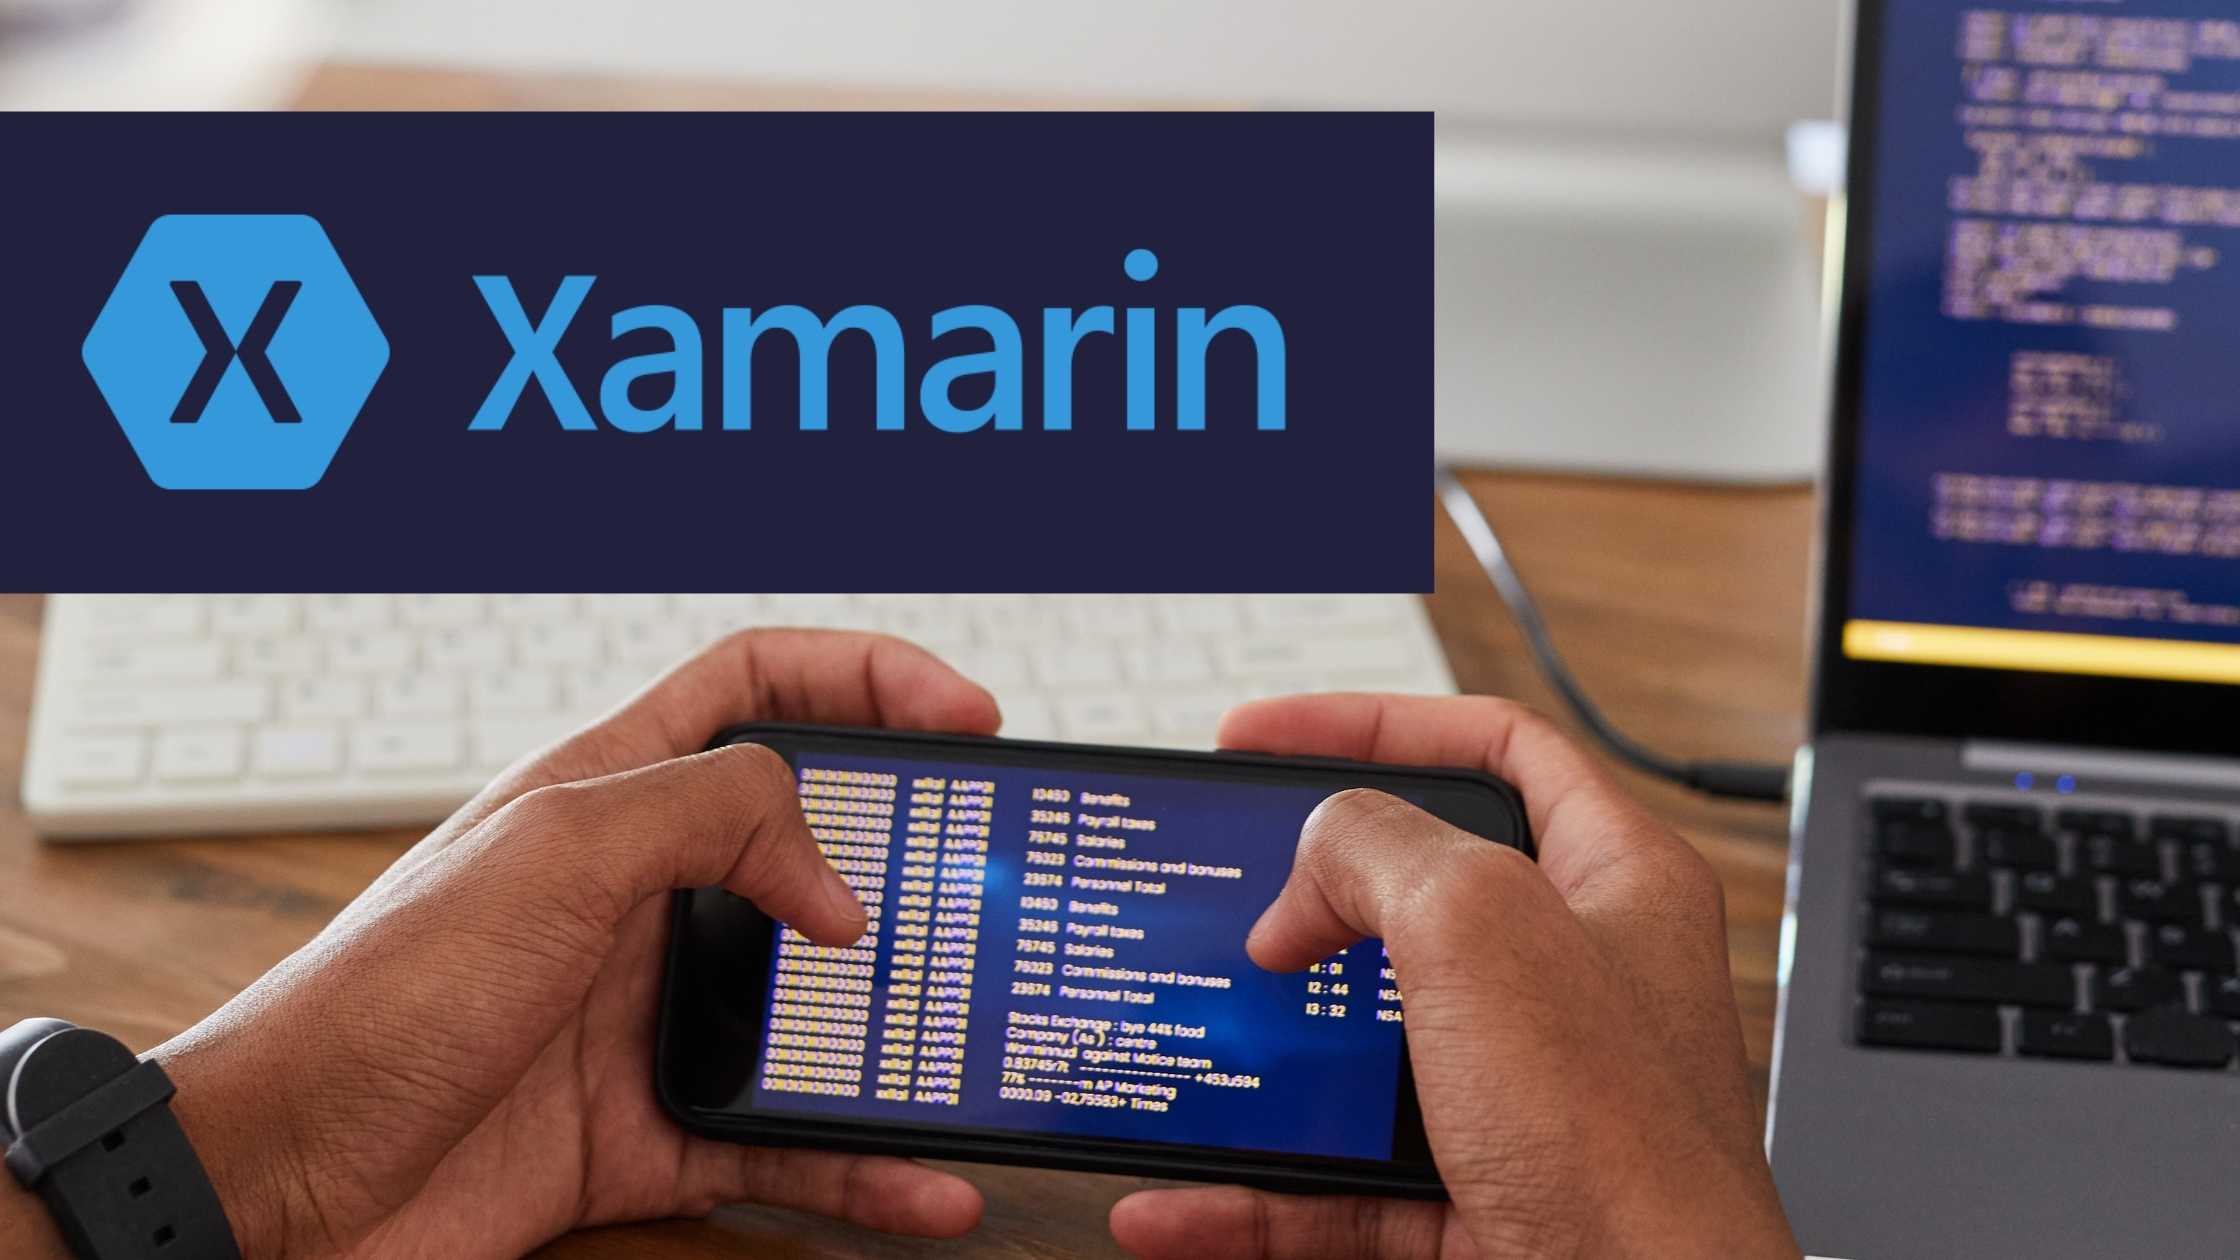 Close up of hands holding mobile phone; laptop and keyboard in background; Dark blue rectangle with Xamarin logo and text